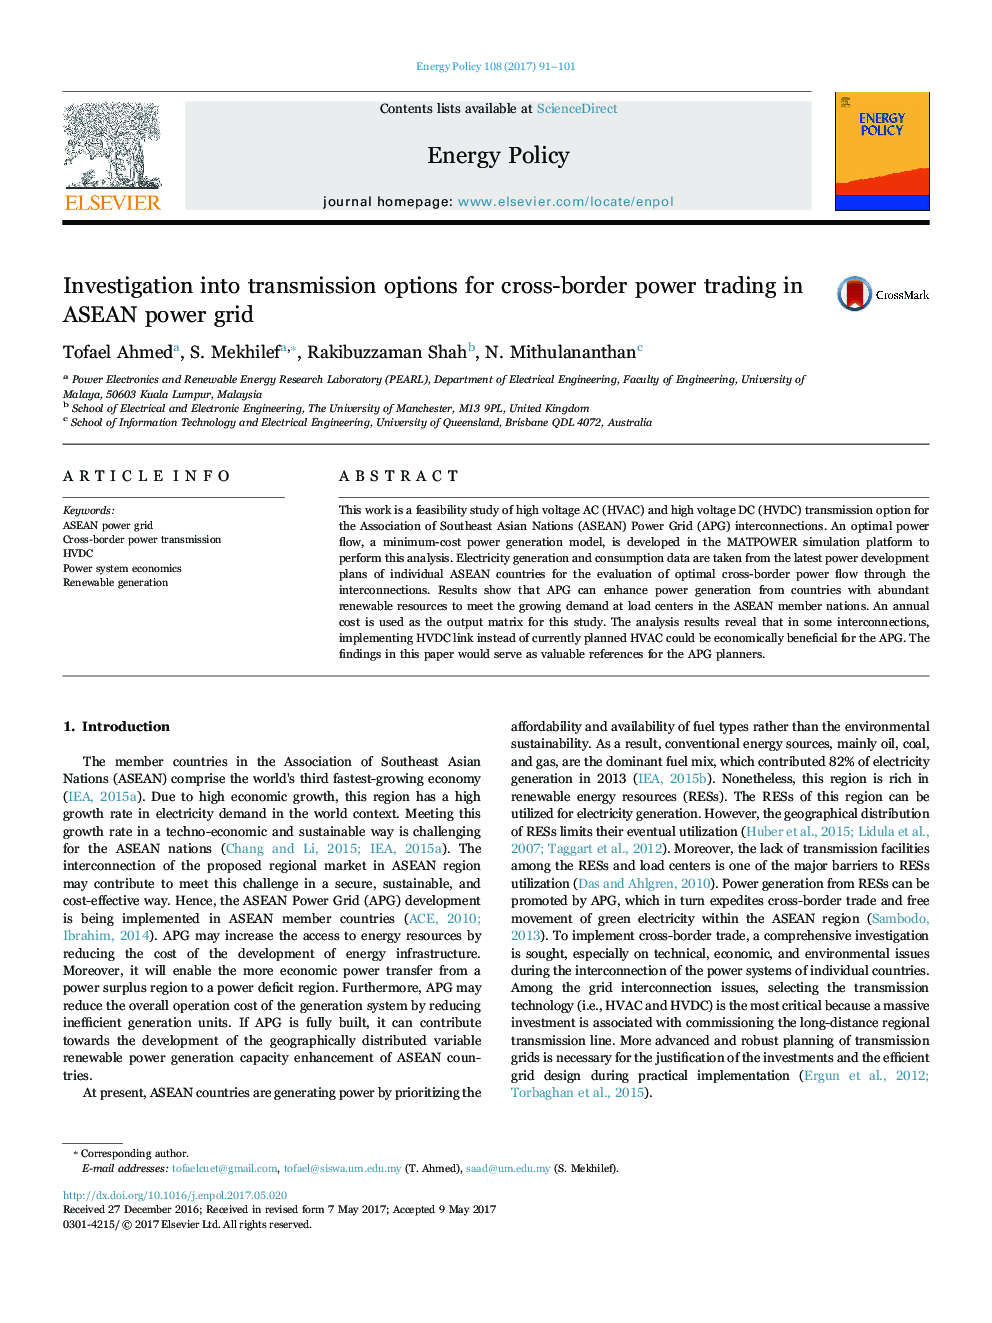 Investigation into transmission options for cross-border power trading in ASEAN power grid